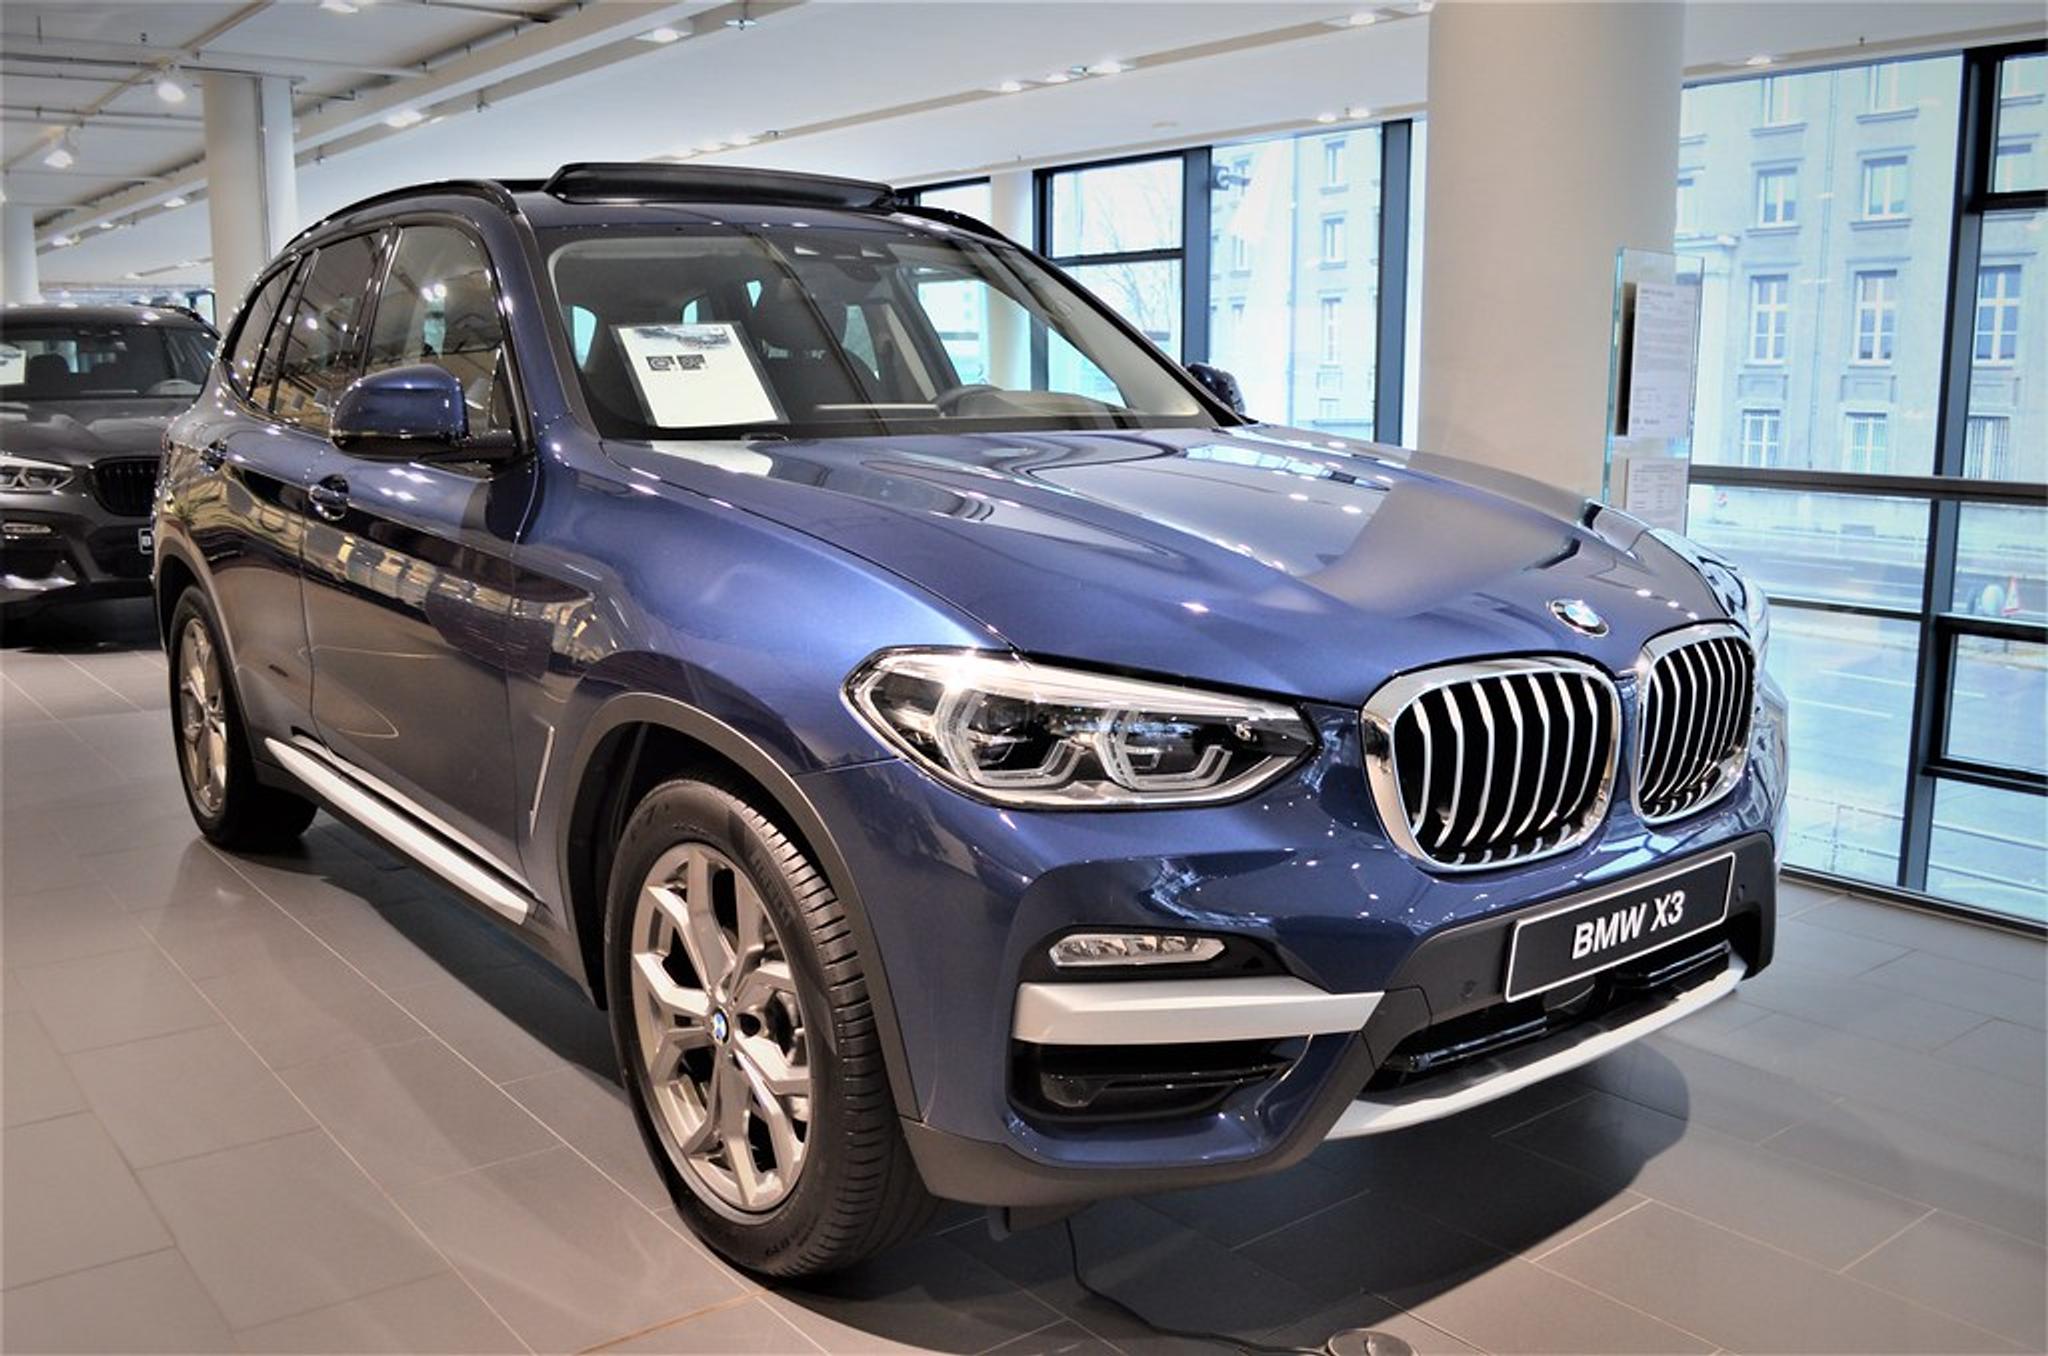 Metallic blue BMW X3 parked in a showroom